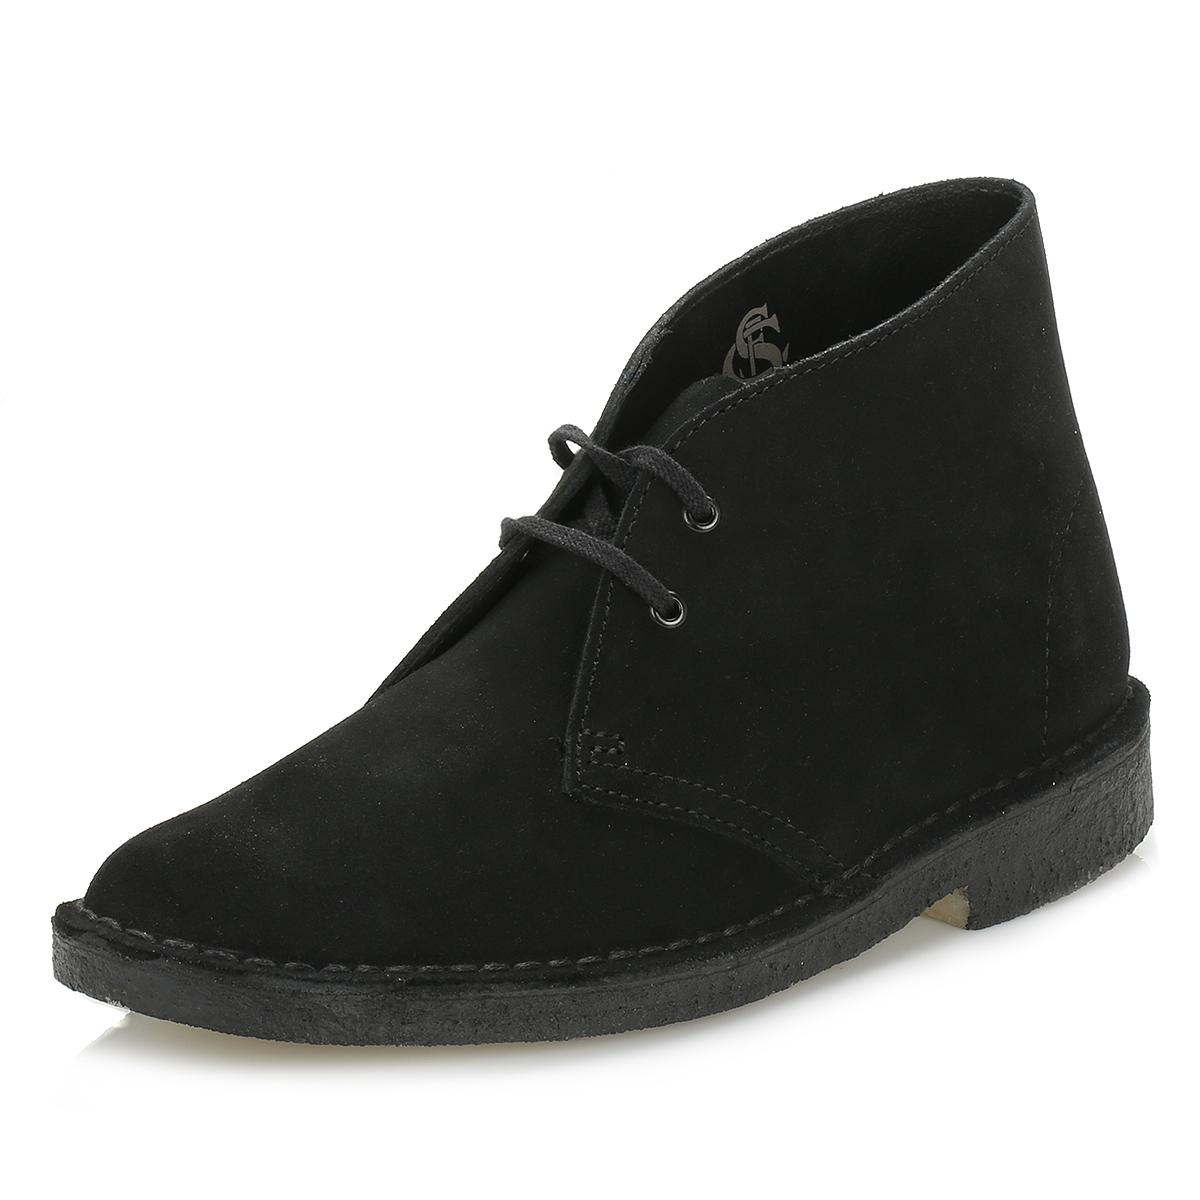 Clarks Womens Black Desert Suede Ankle Boots - Lyst